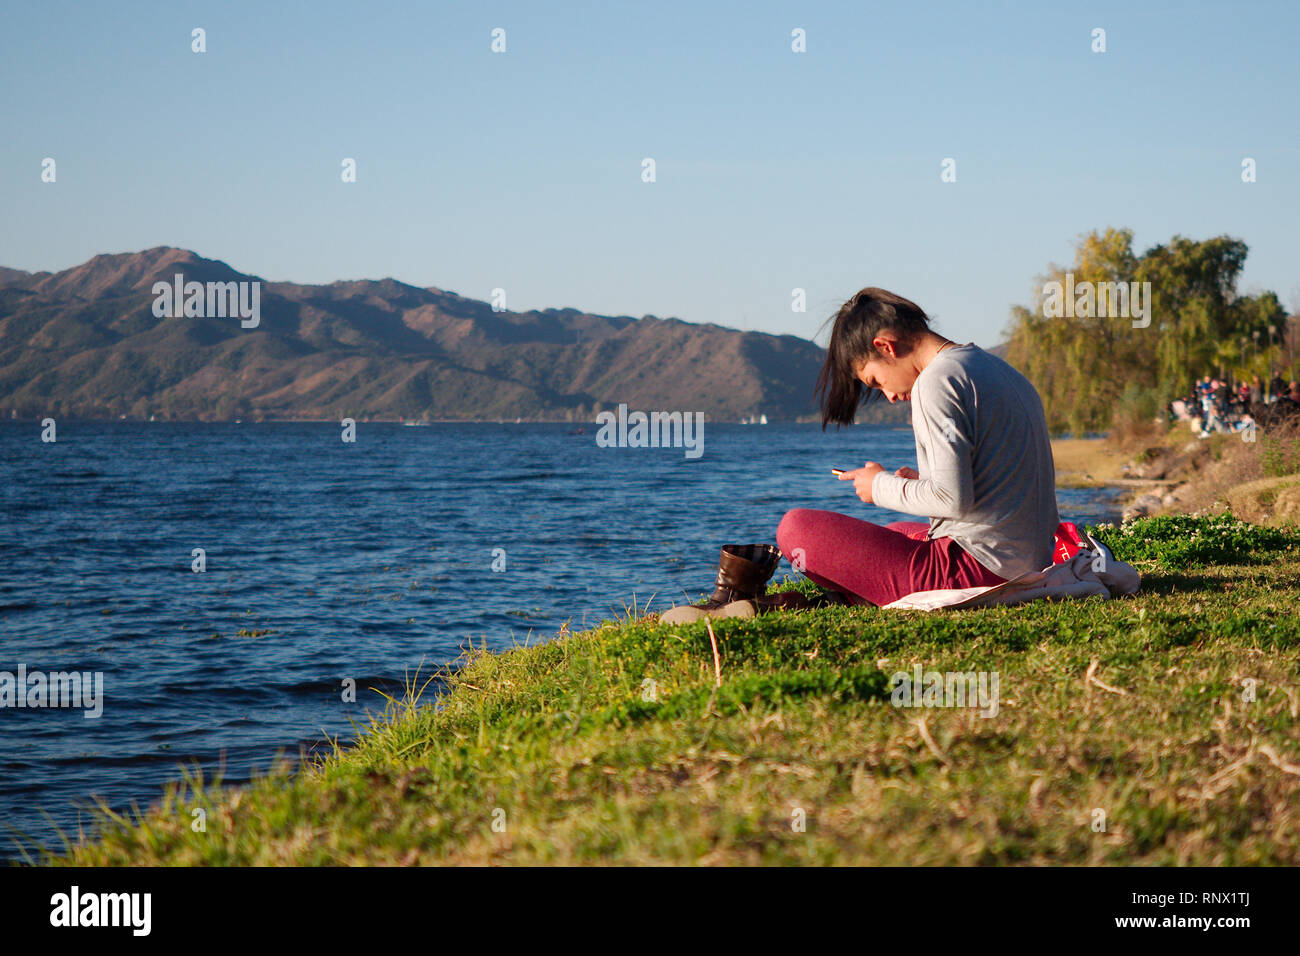 Villa Carlos Paz, Cordoba, Argentina - 2019: A young woman rests with her shoes off  by the San Roque lake on a Sunday evening. Stock Photo